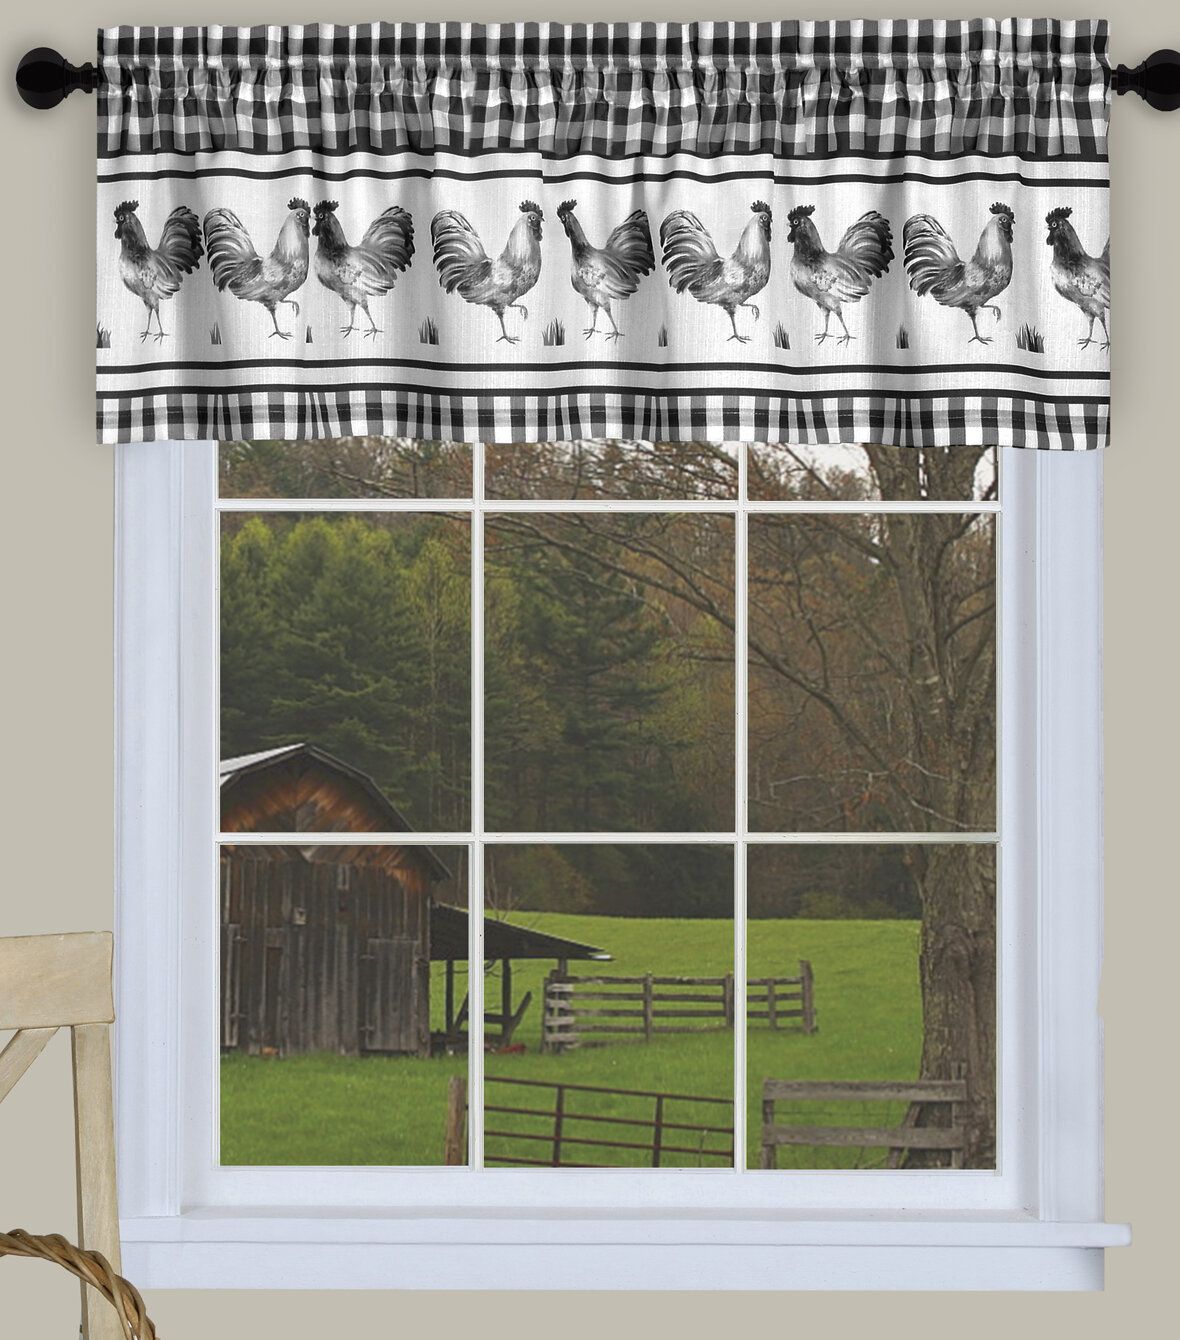 Deraps 58" Window Valance For Barnyard Buffalo Check Rooster Window Valances (View 15 of 20)